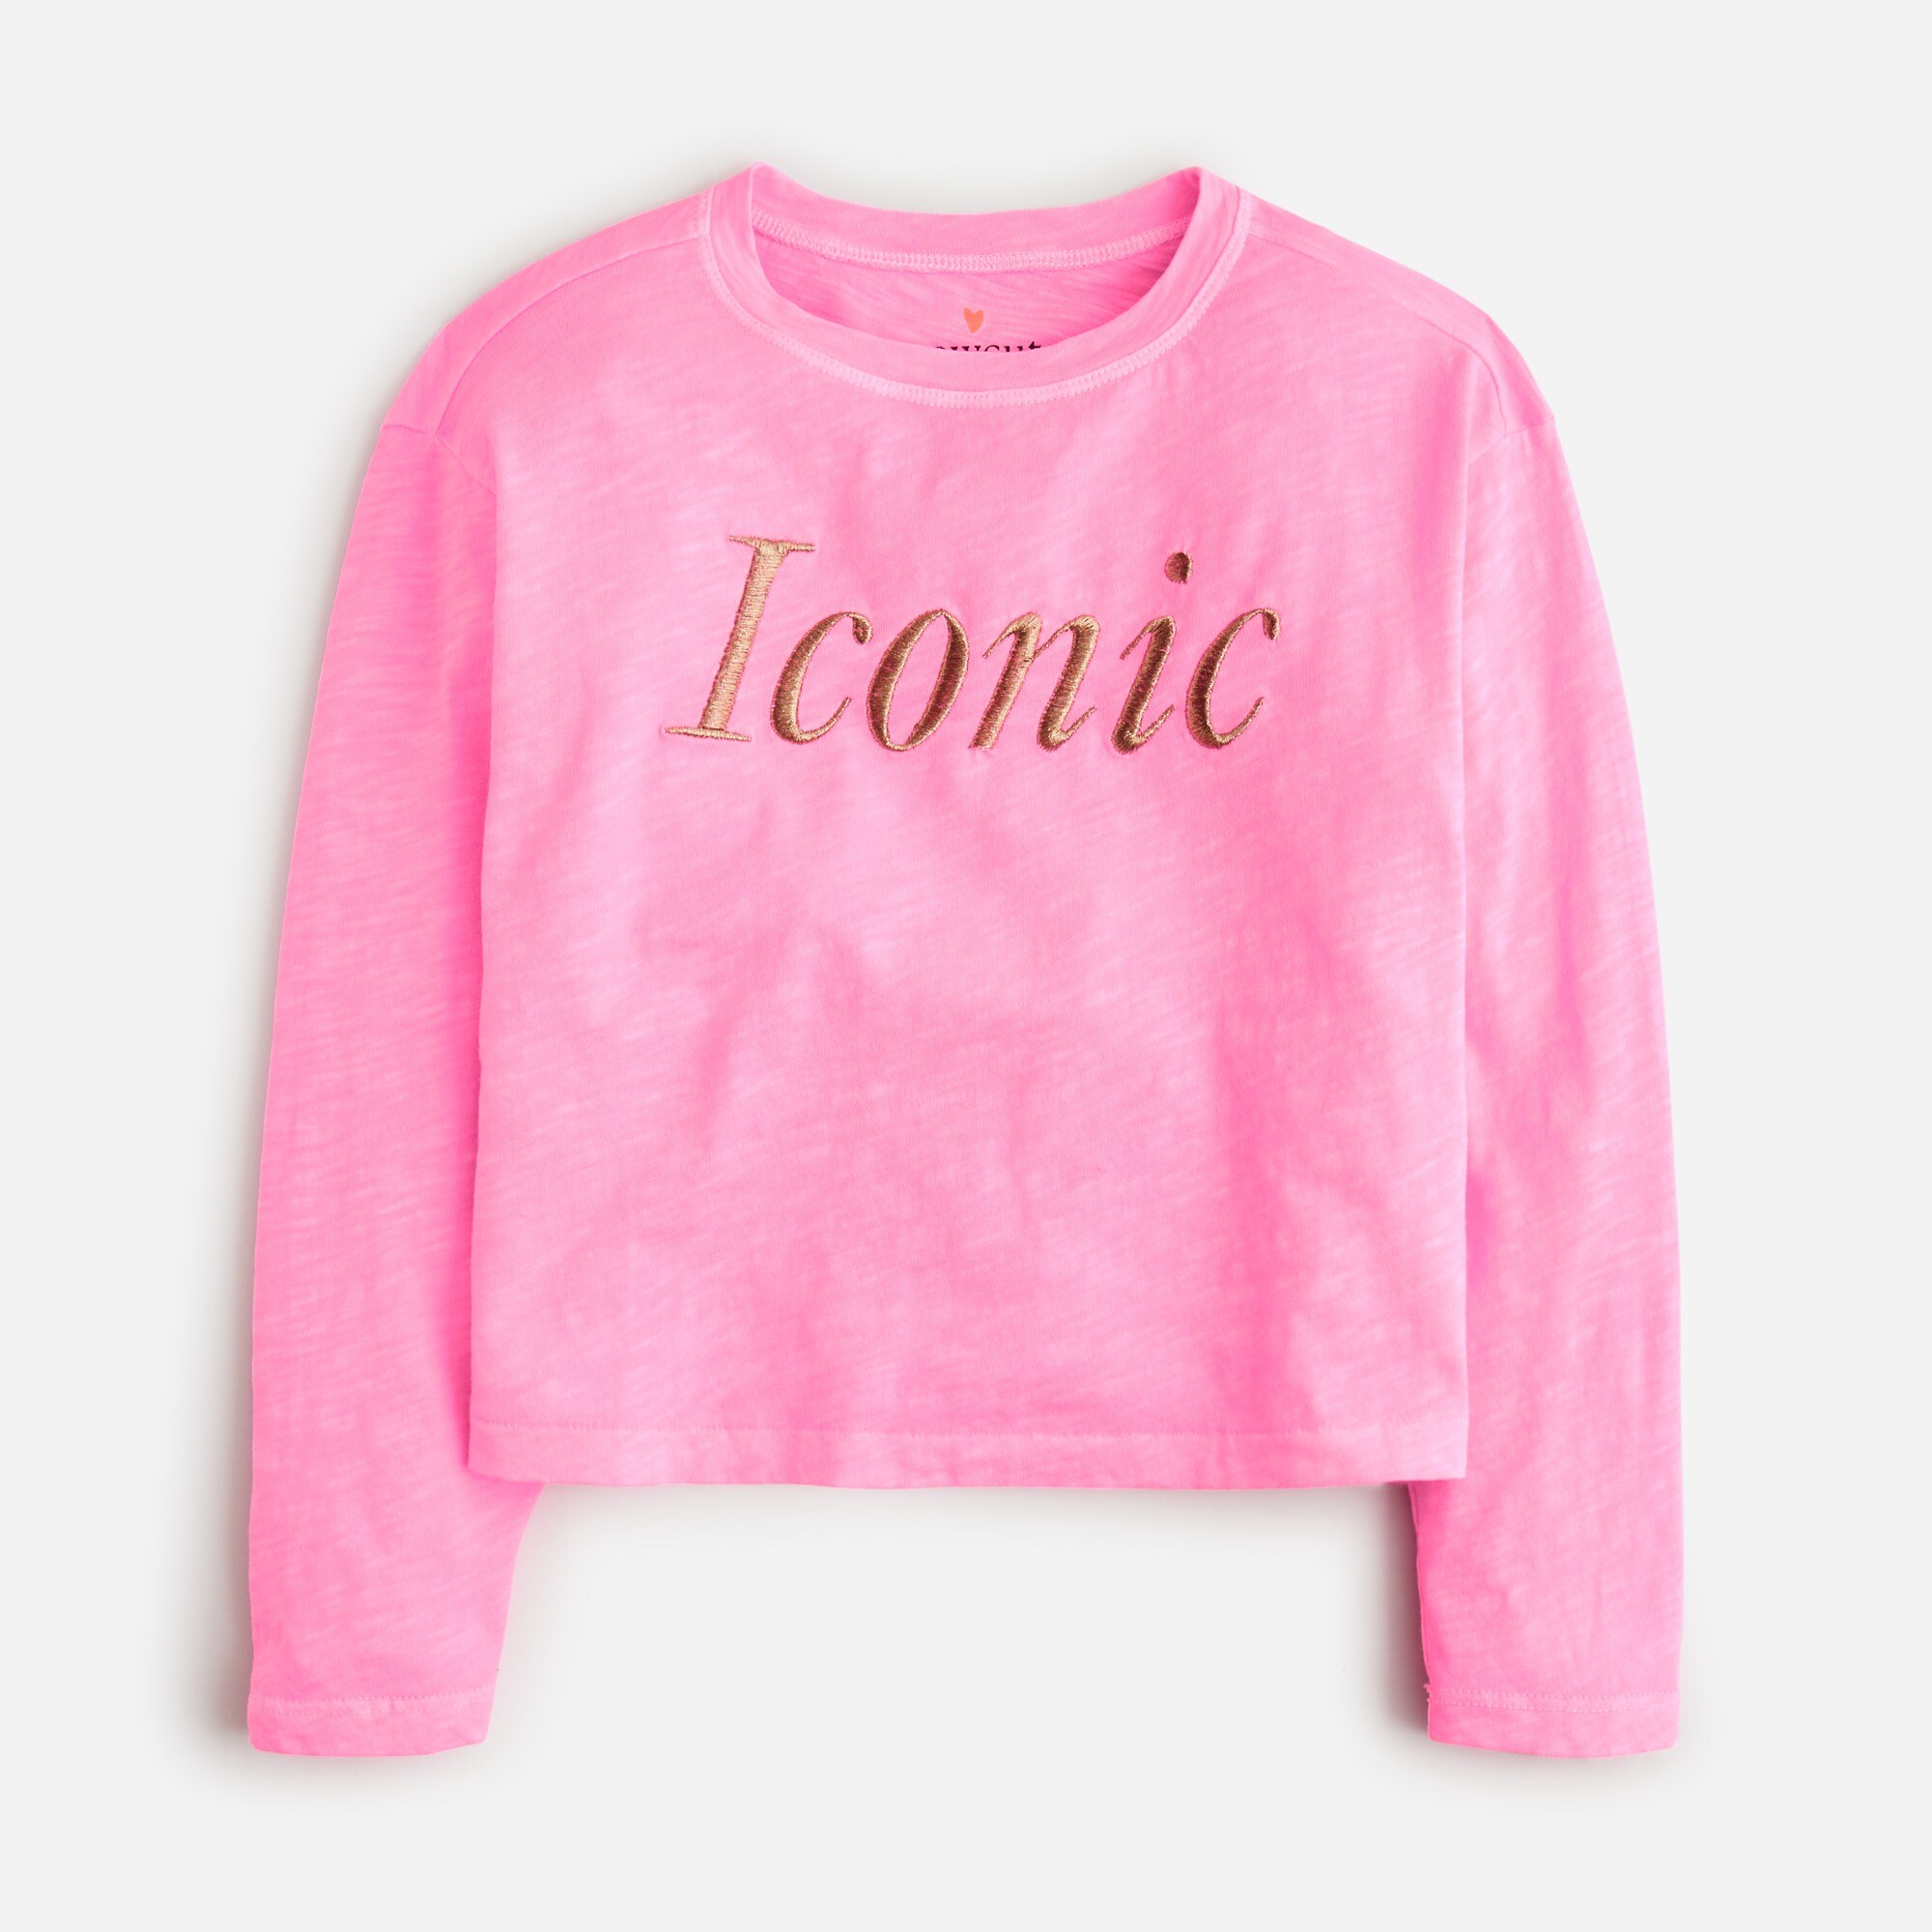  Girls' cropped &quot;iconic&quot; graphic T-shirt with embroidery